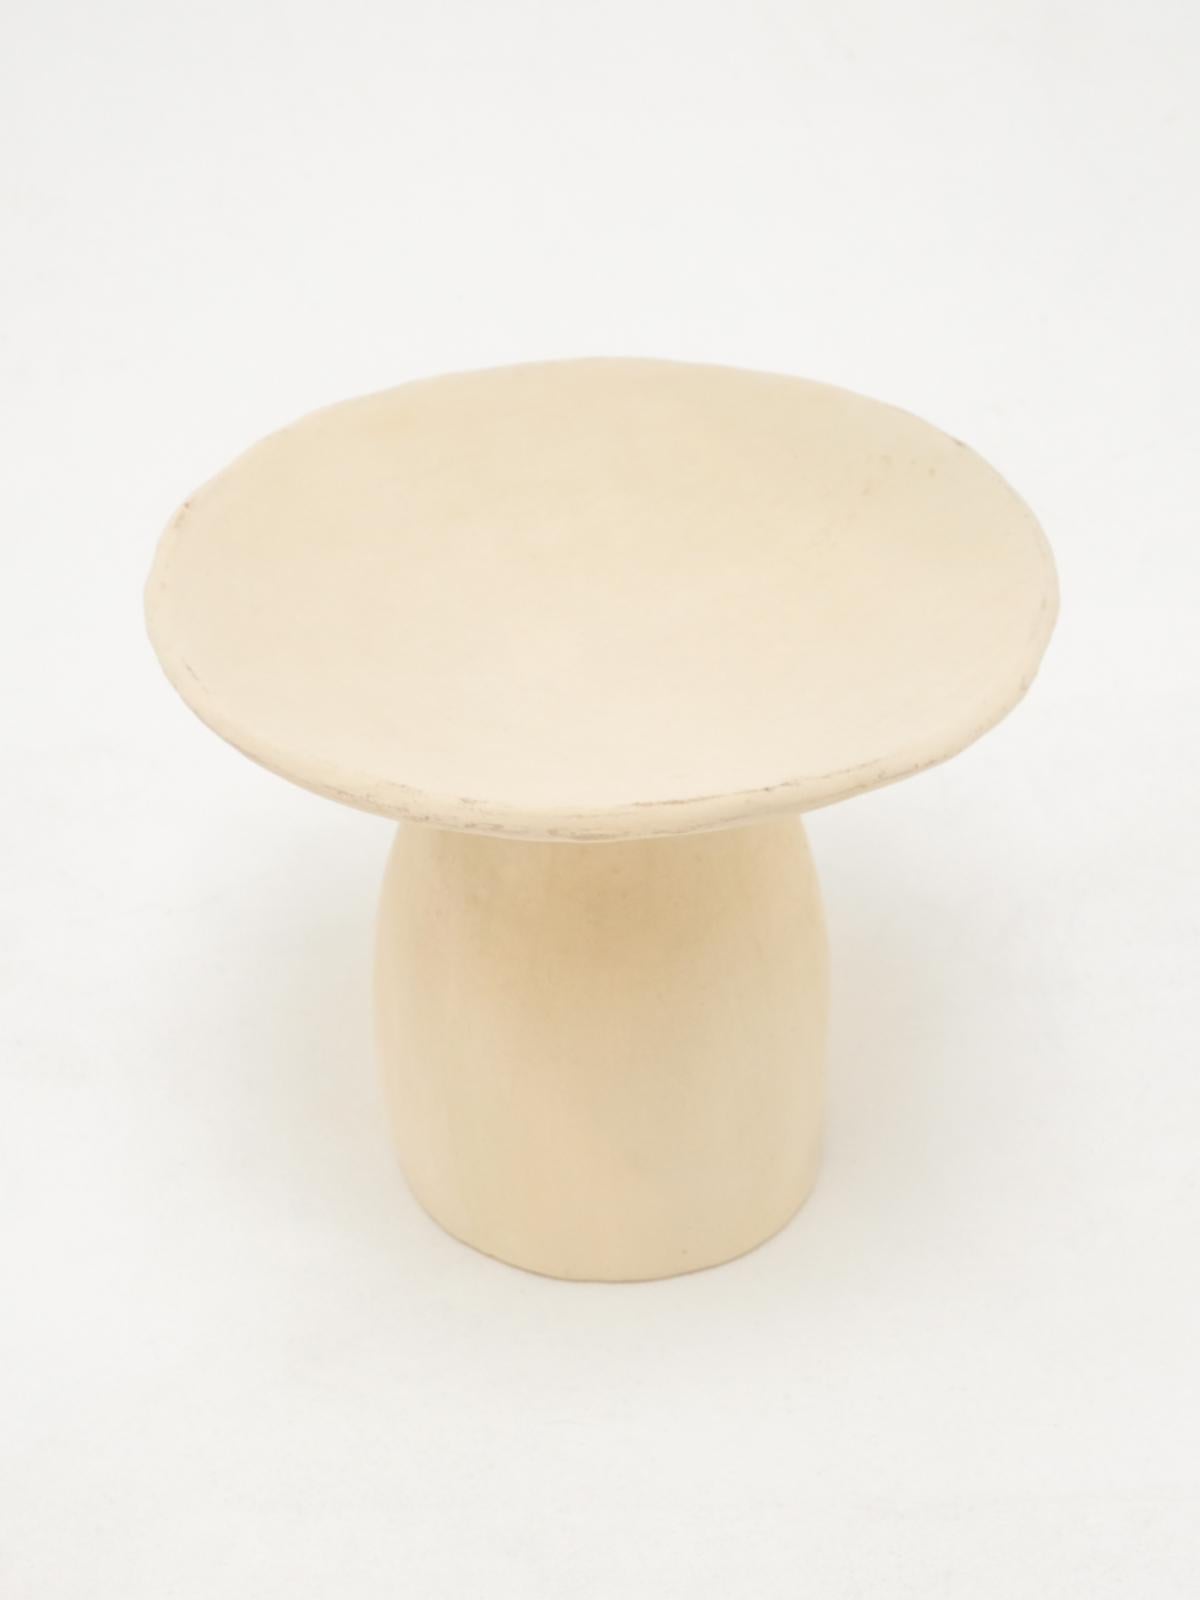 Moroccan White Side Tables Made of local Clay, natural pigments, Handcrafted For Sale